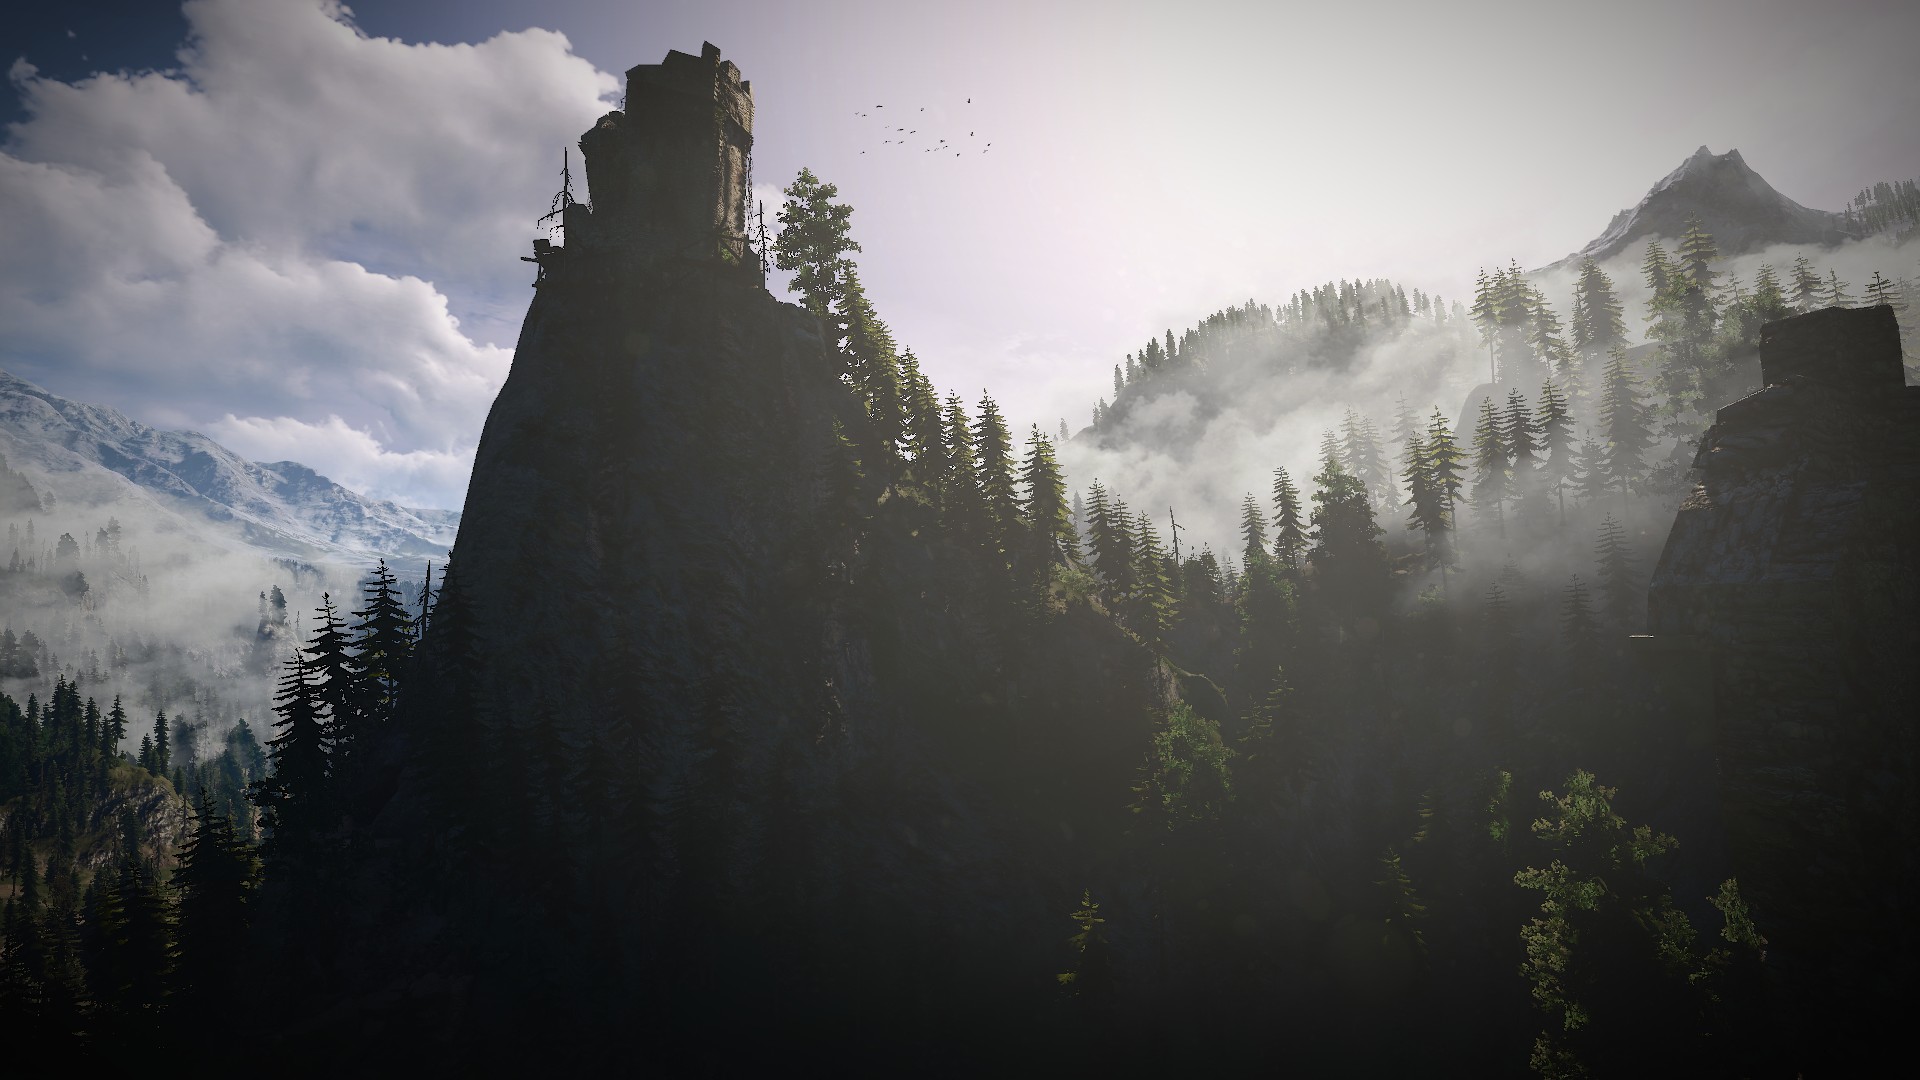 The Witcher 3: Wild Hunt, Kaer Morhen, The Witcher Wallpaper